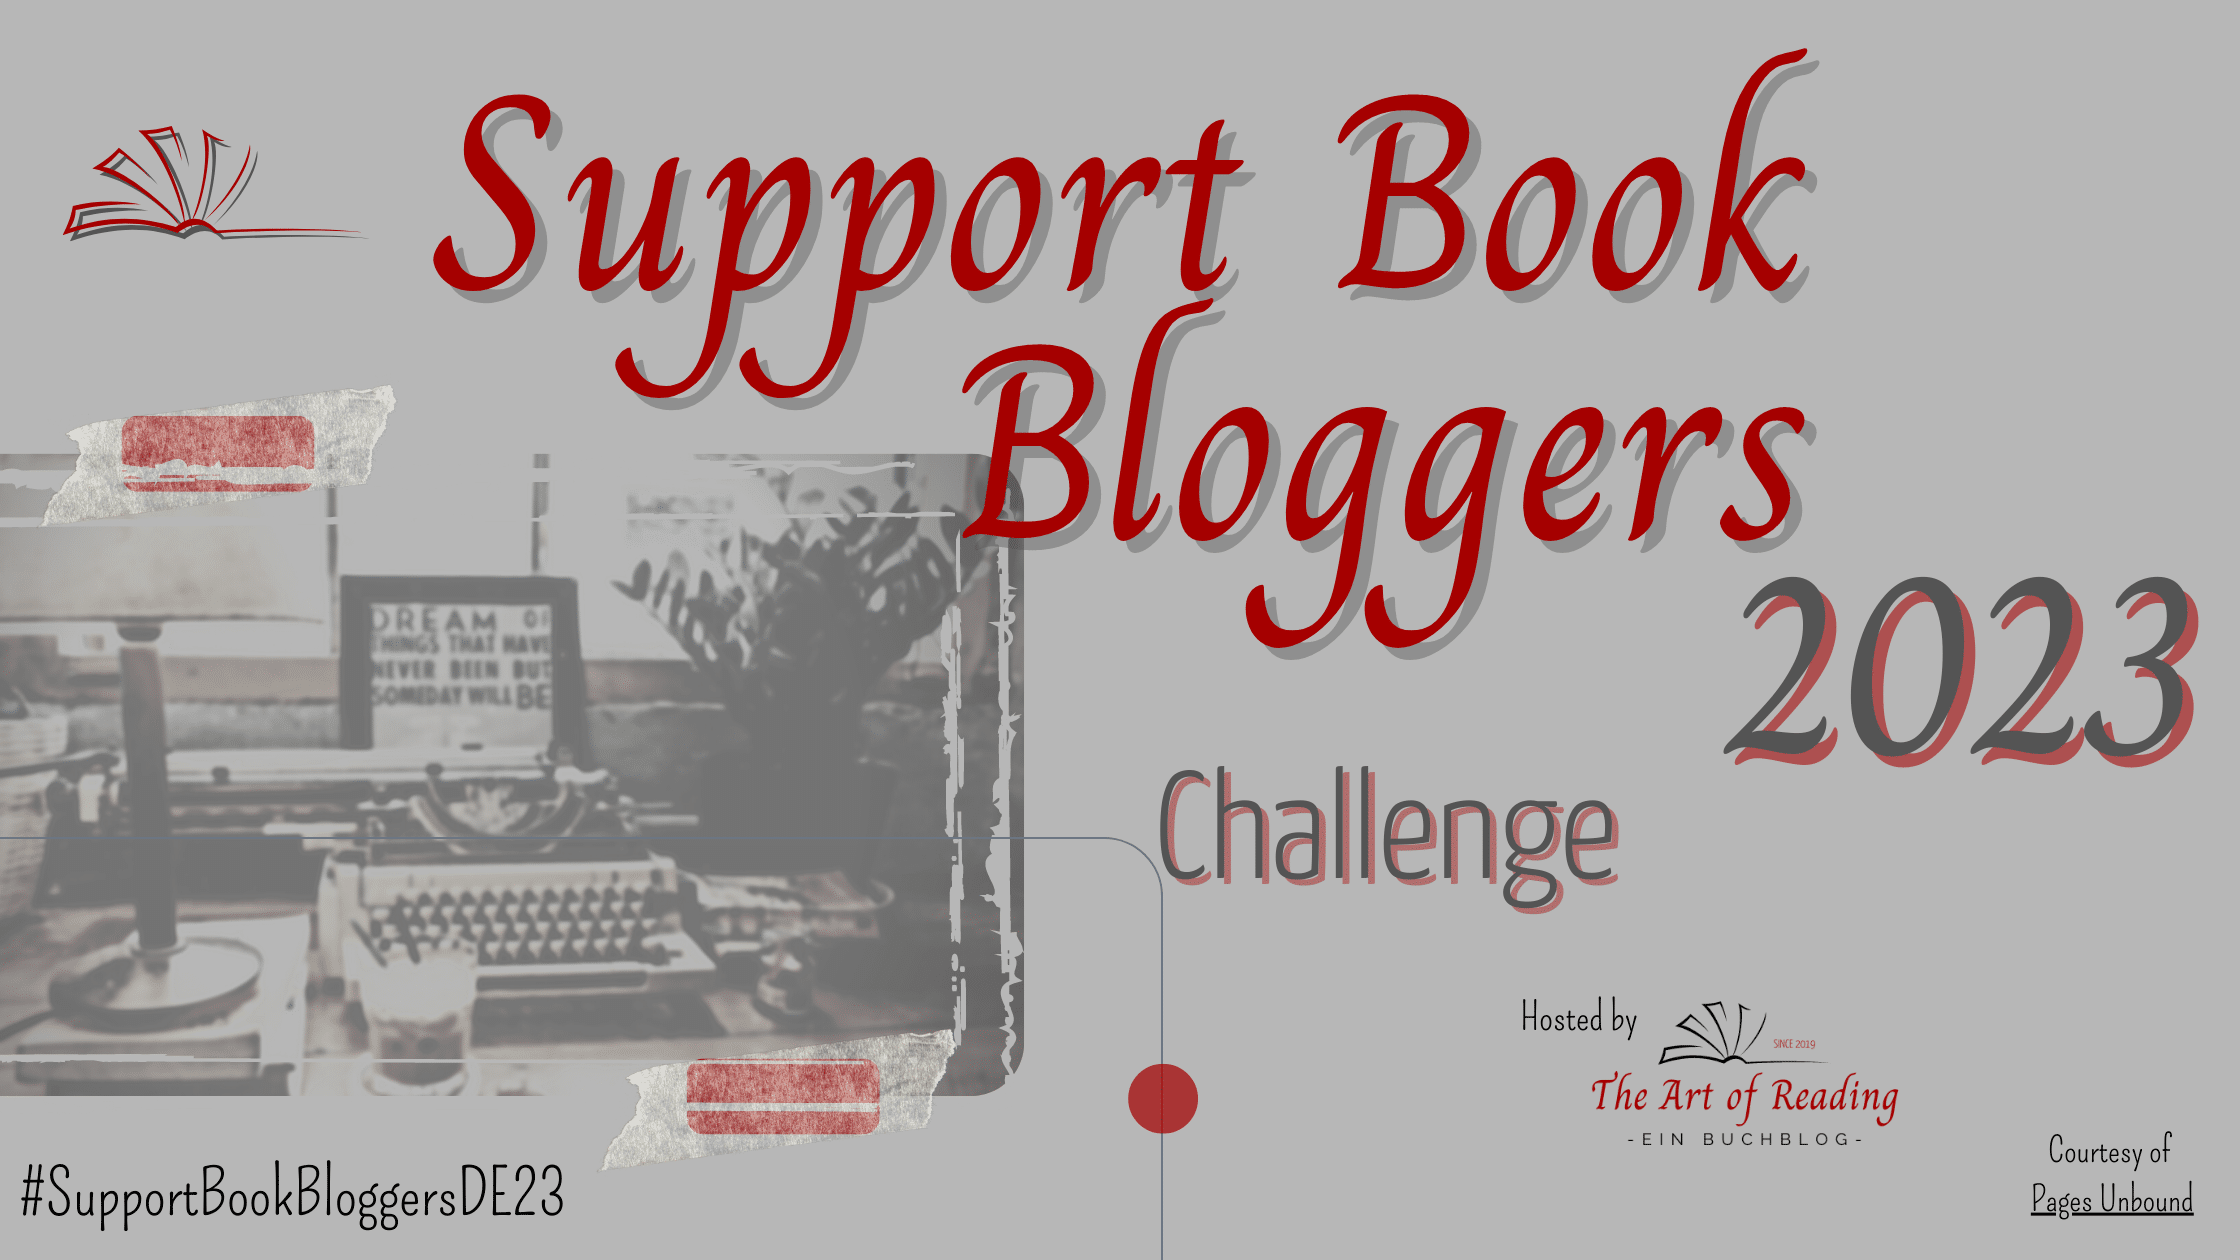 wp-content/uploads/2022/11/Support-Book-Bloggers-Challenge-Blog-Banner.png